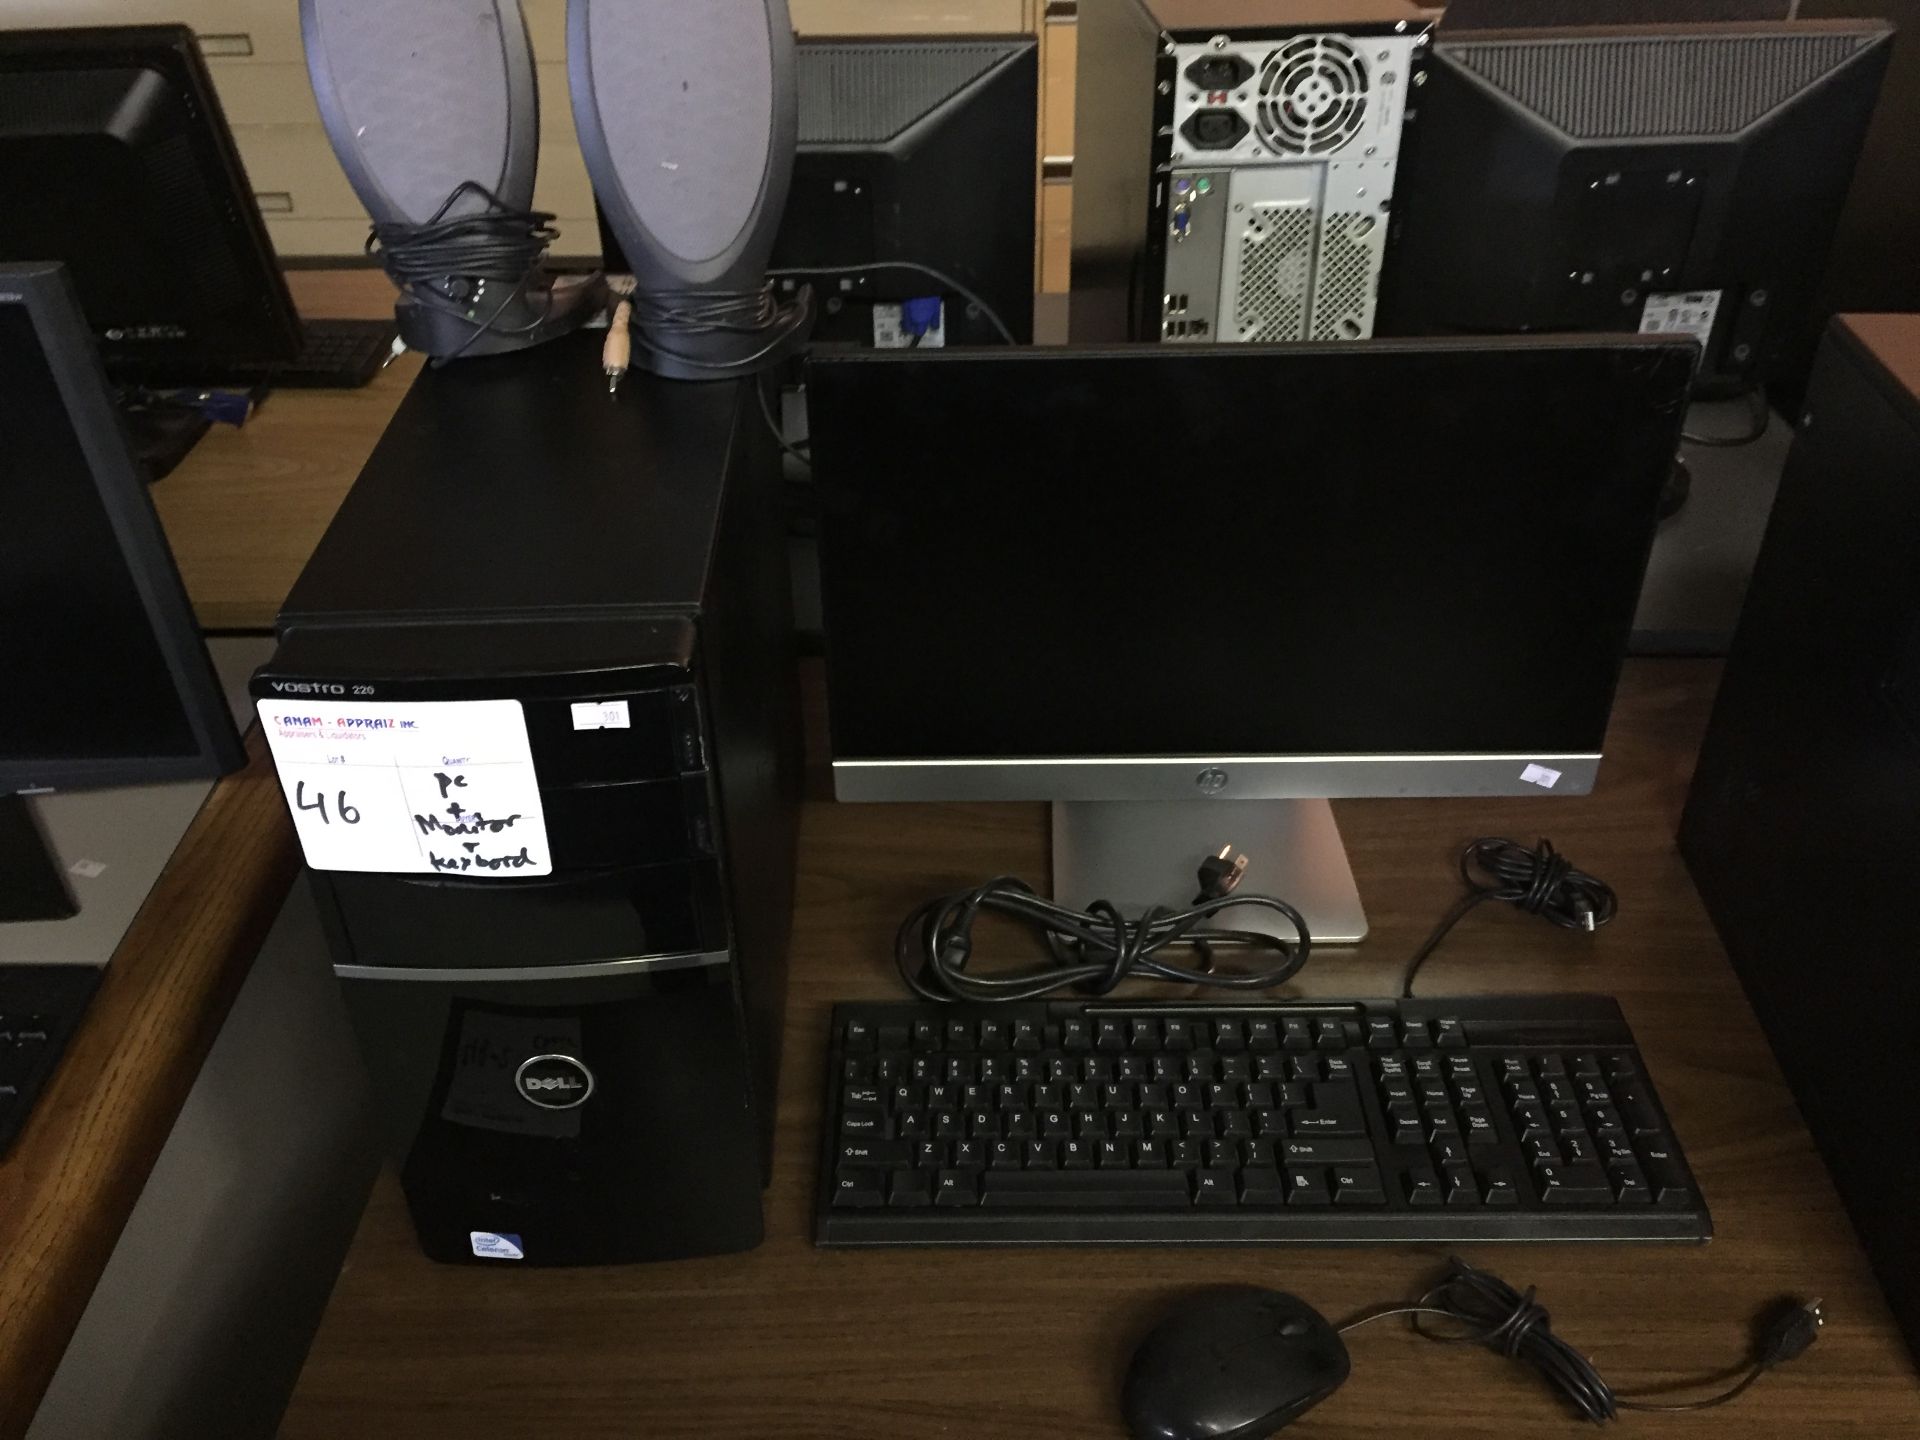 PC, MONITOR, KEYBOARD, MOUSE, SPEAKERS - 1PC, DELL VOSTRO 220 CELESON - 1PC, HP PAVILION MONITOR